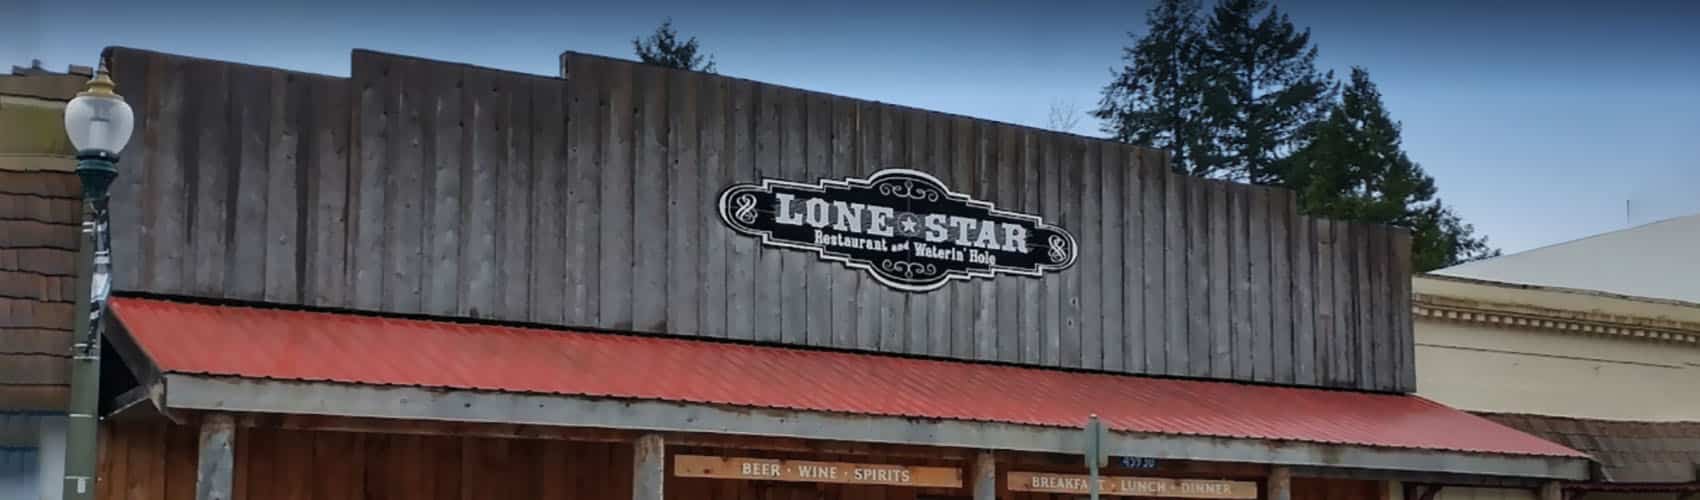 The Lonestar page top exterior